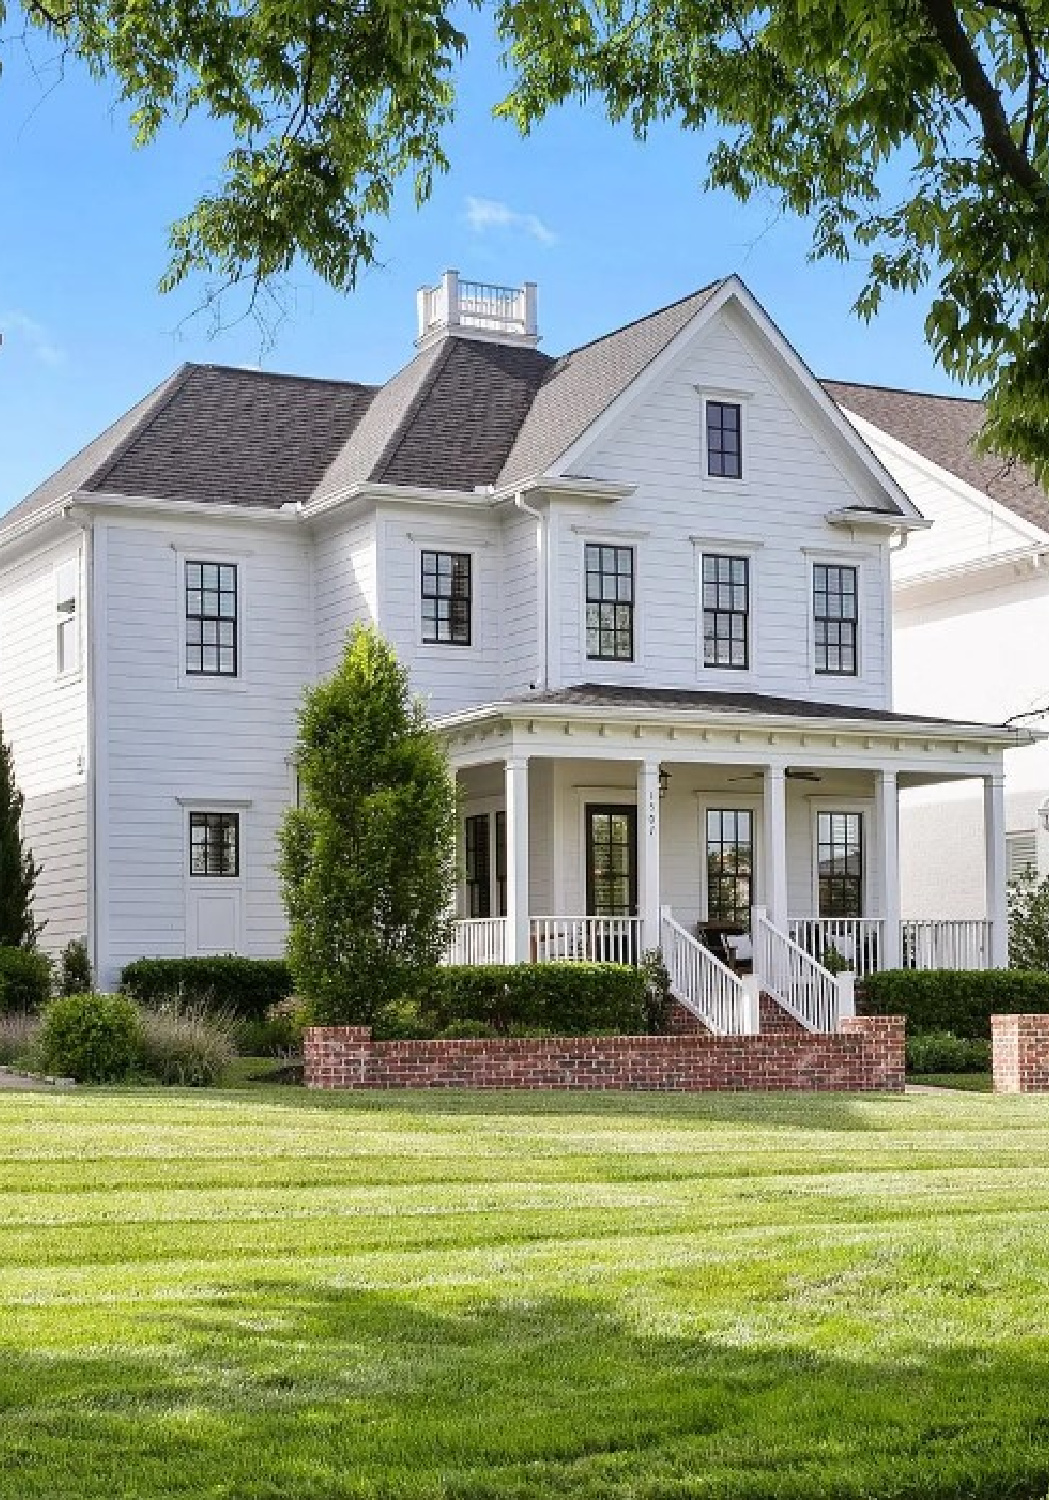 Beautiful white farmhouse with front porch on Eliot Rd. in Franklin, TN.